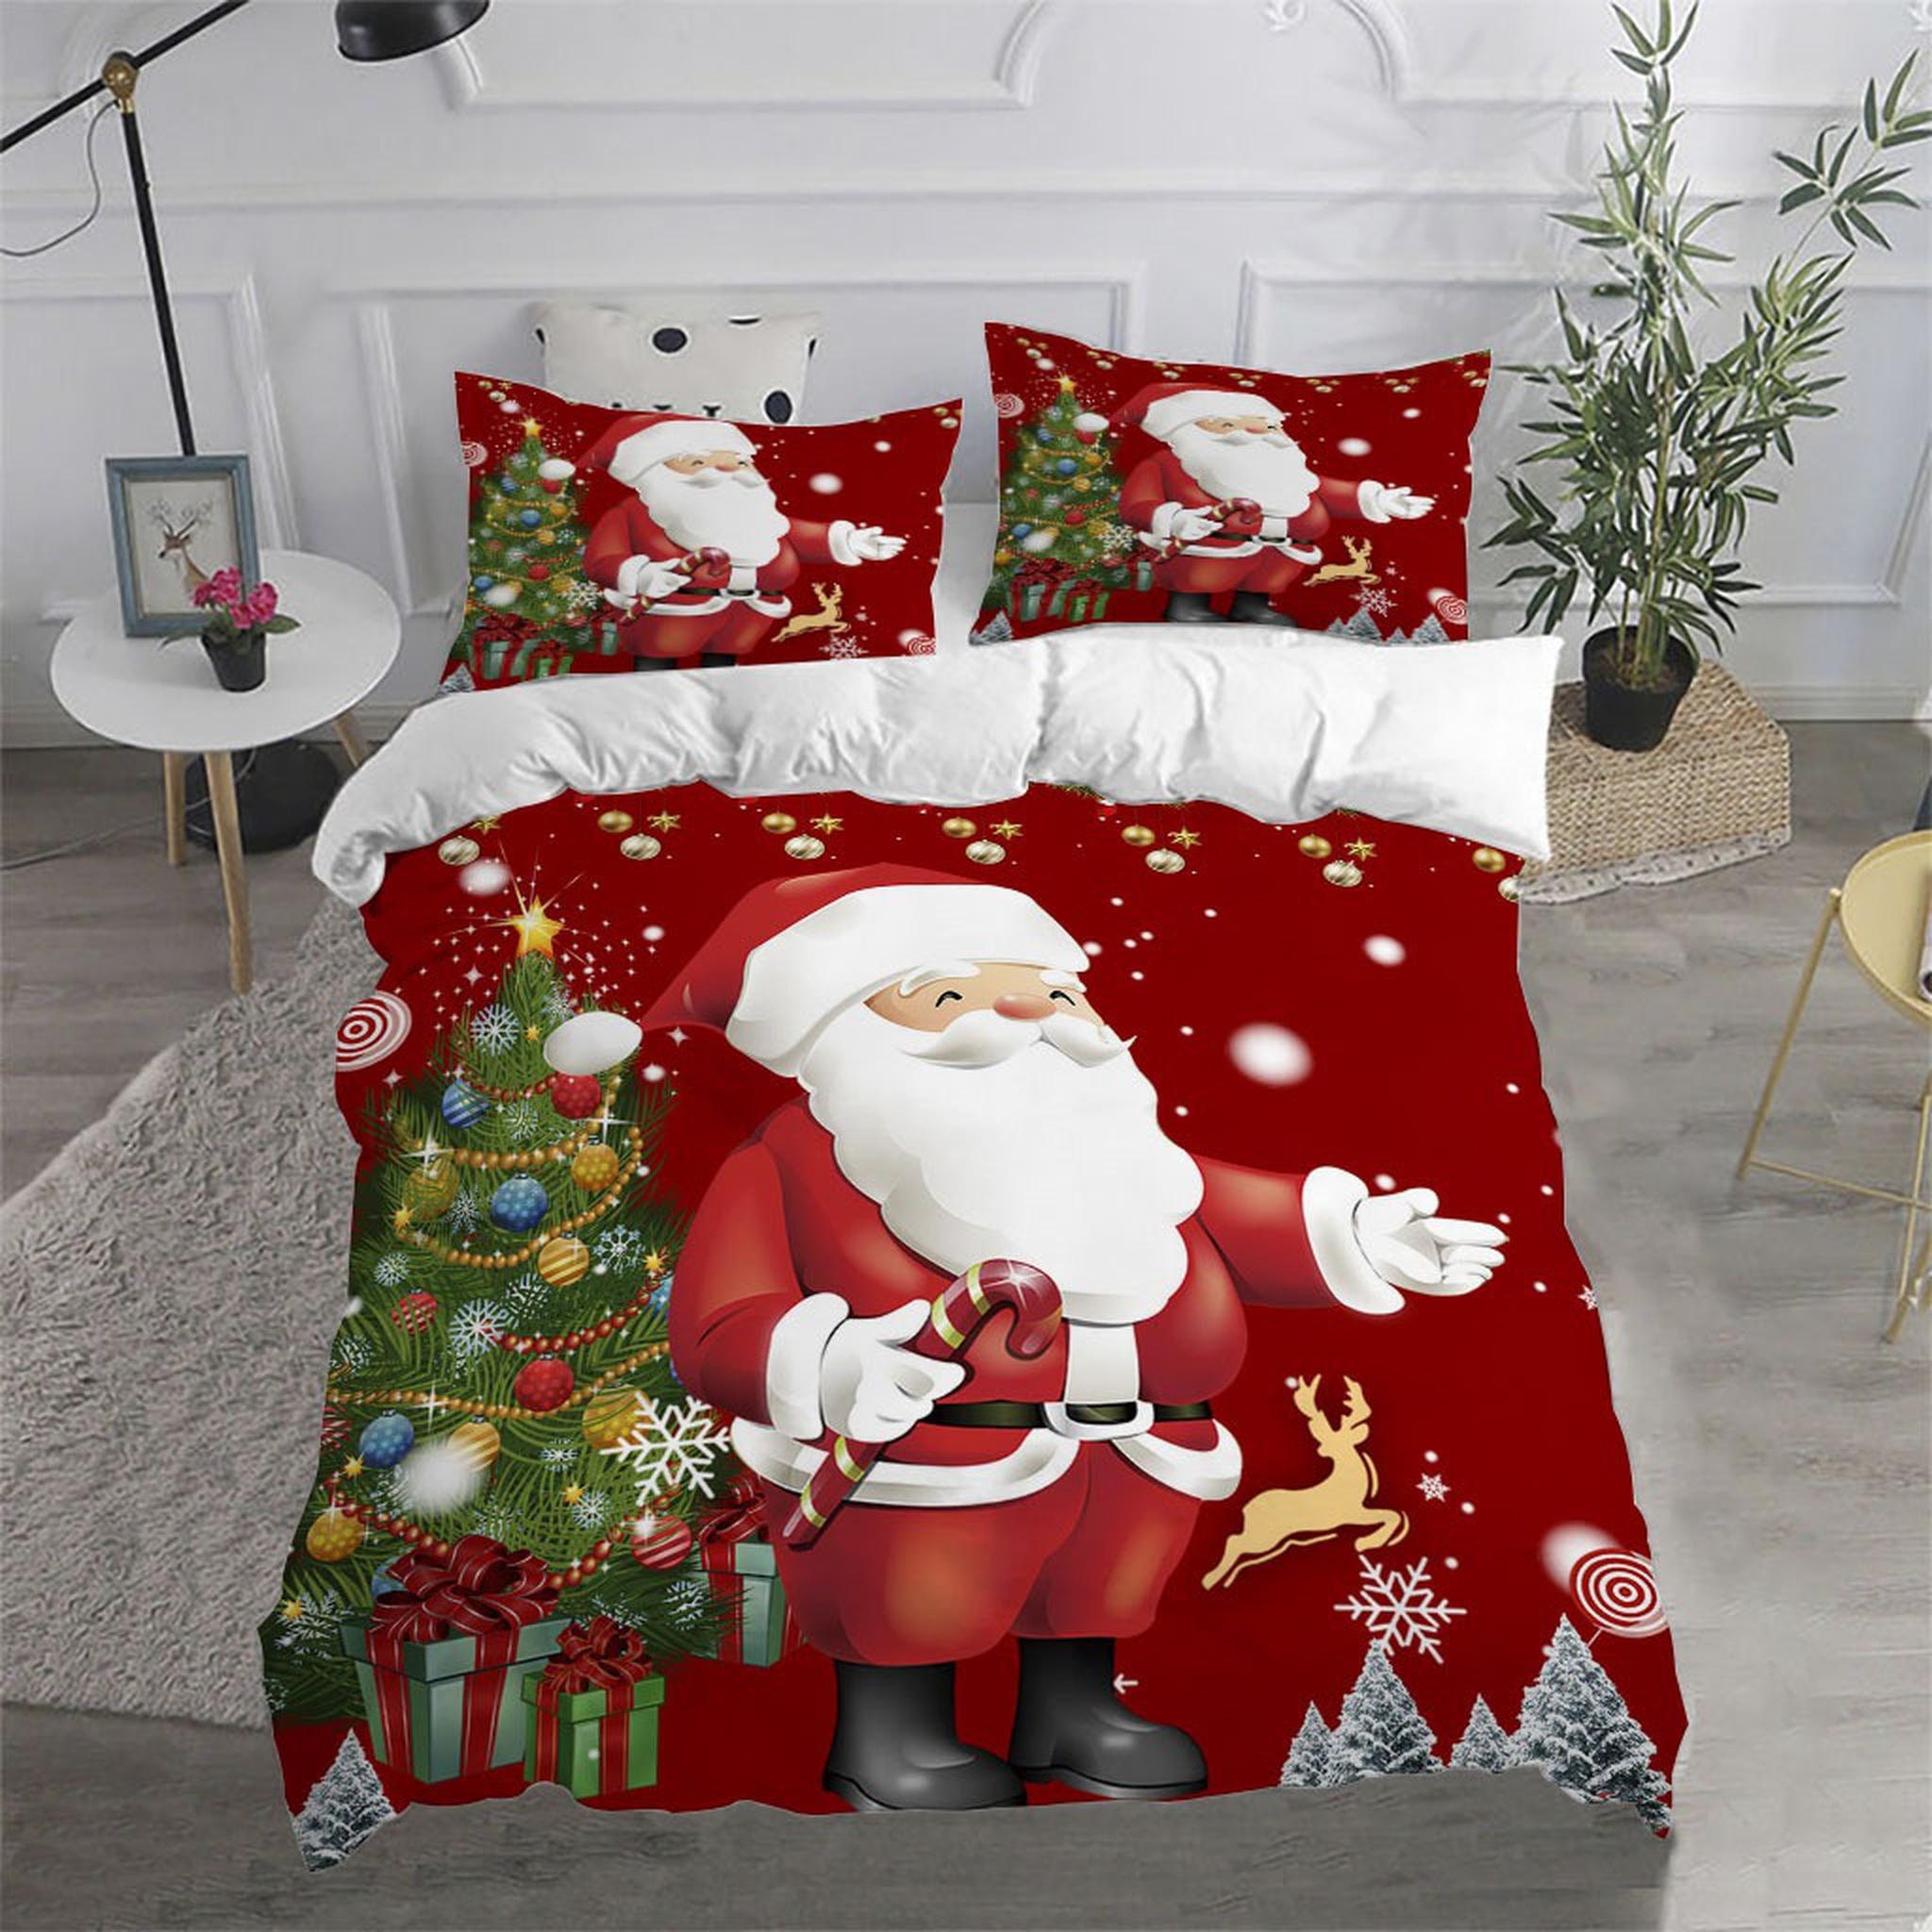 Manfei Christmas Bedspread Twin Size Santa Claus with Candles and Gift Boxes Print Coverlet Set 2pcs for Kids Boys Girls New Year Theme Quilted Coverlet Winter Snow Bedding Quilt with 1 Pillowcase 